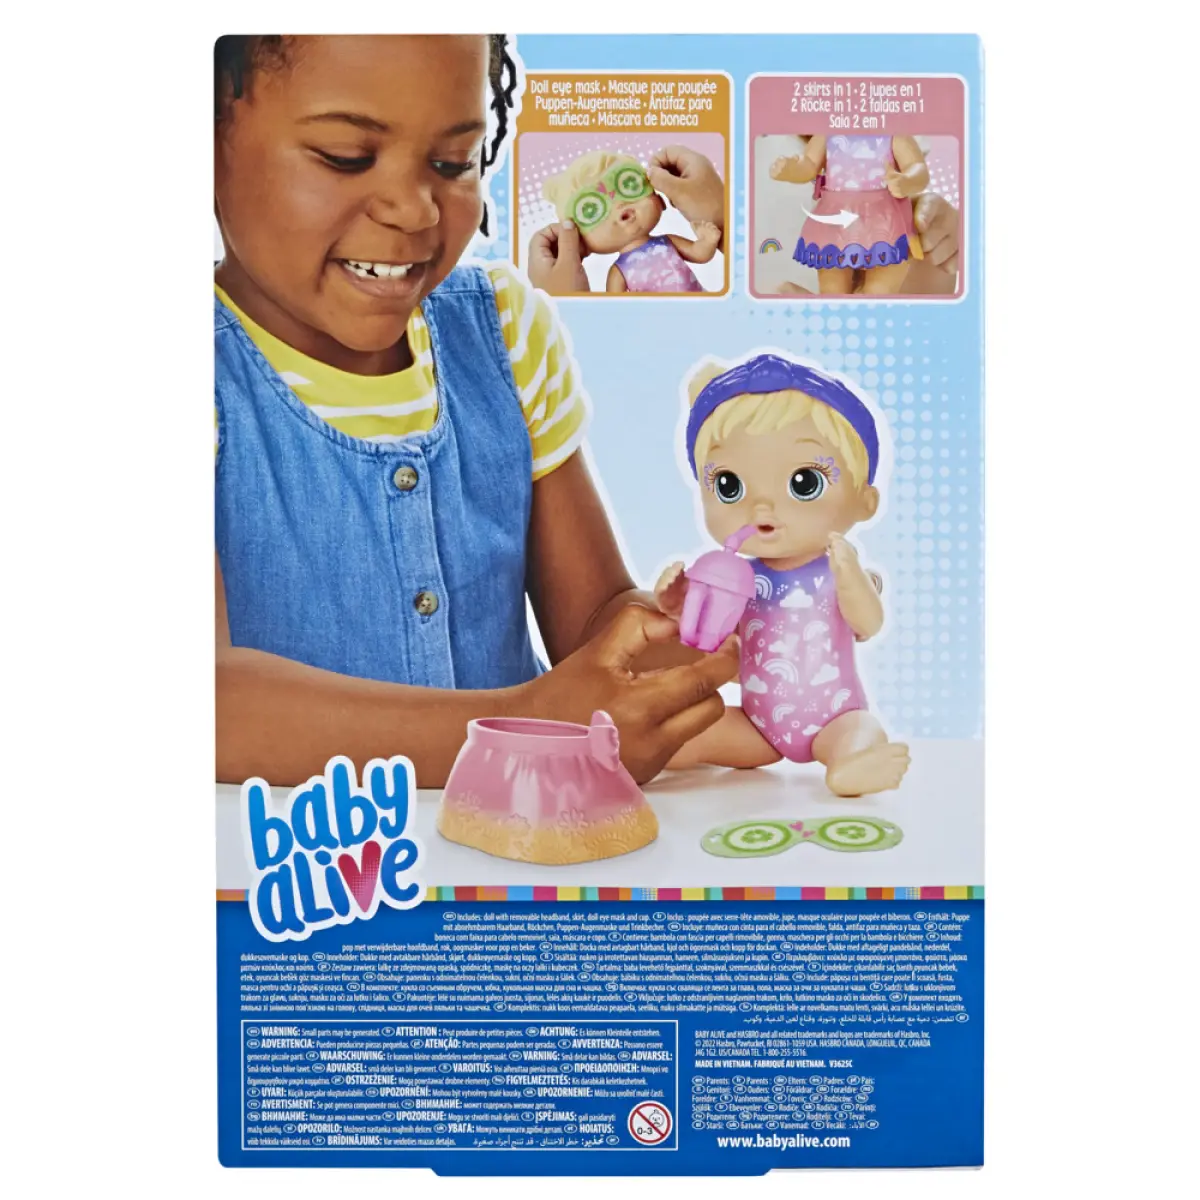 Baby Alive Rainbow Spa Baby Doll, 10-Inch Spa-Themed Toy, 3Yrs+